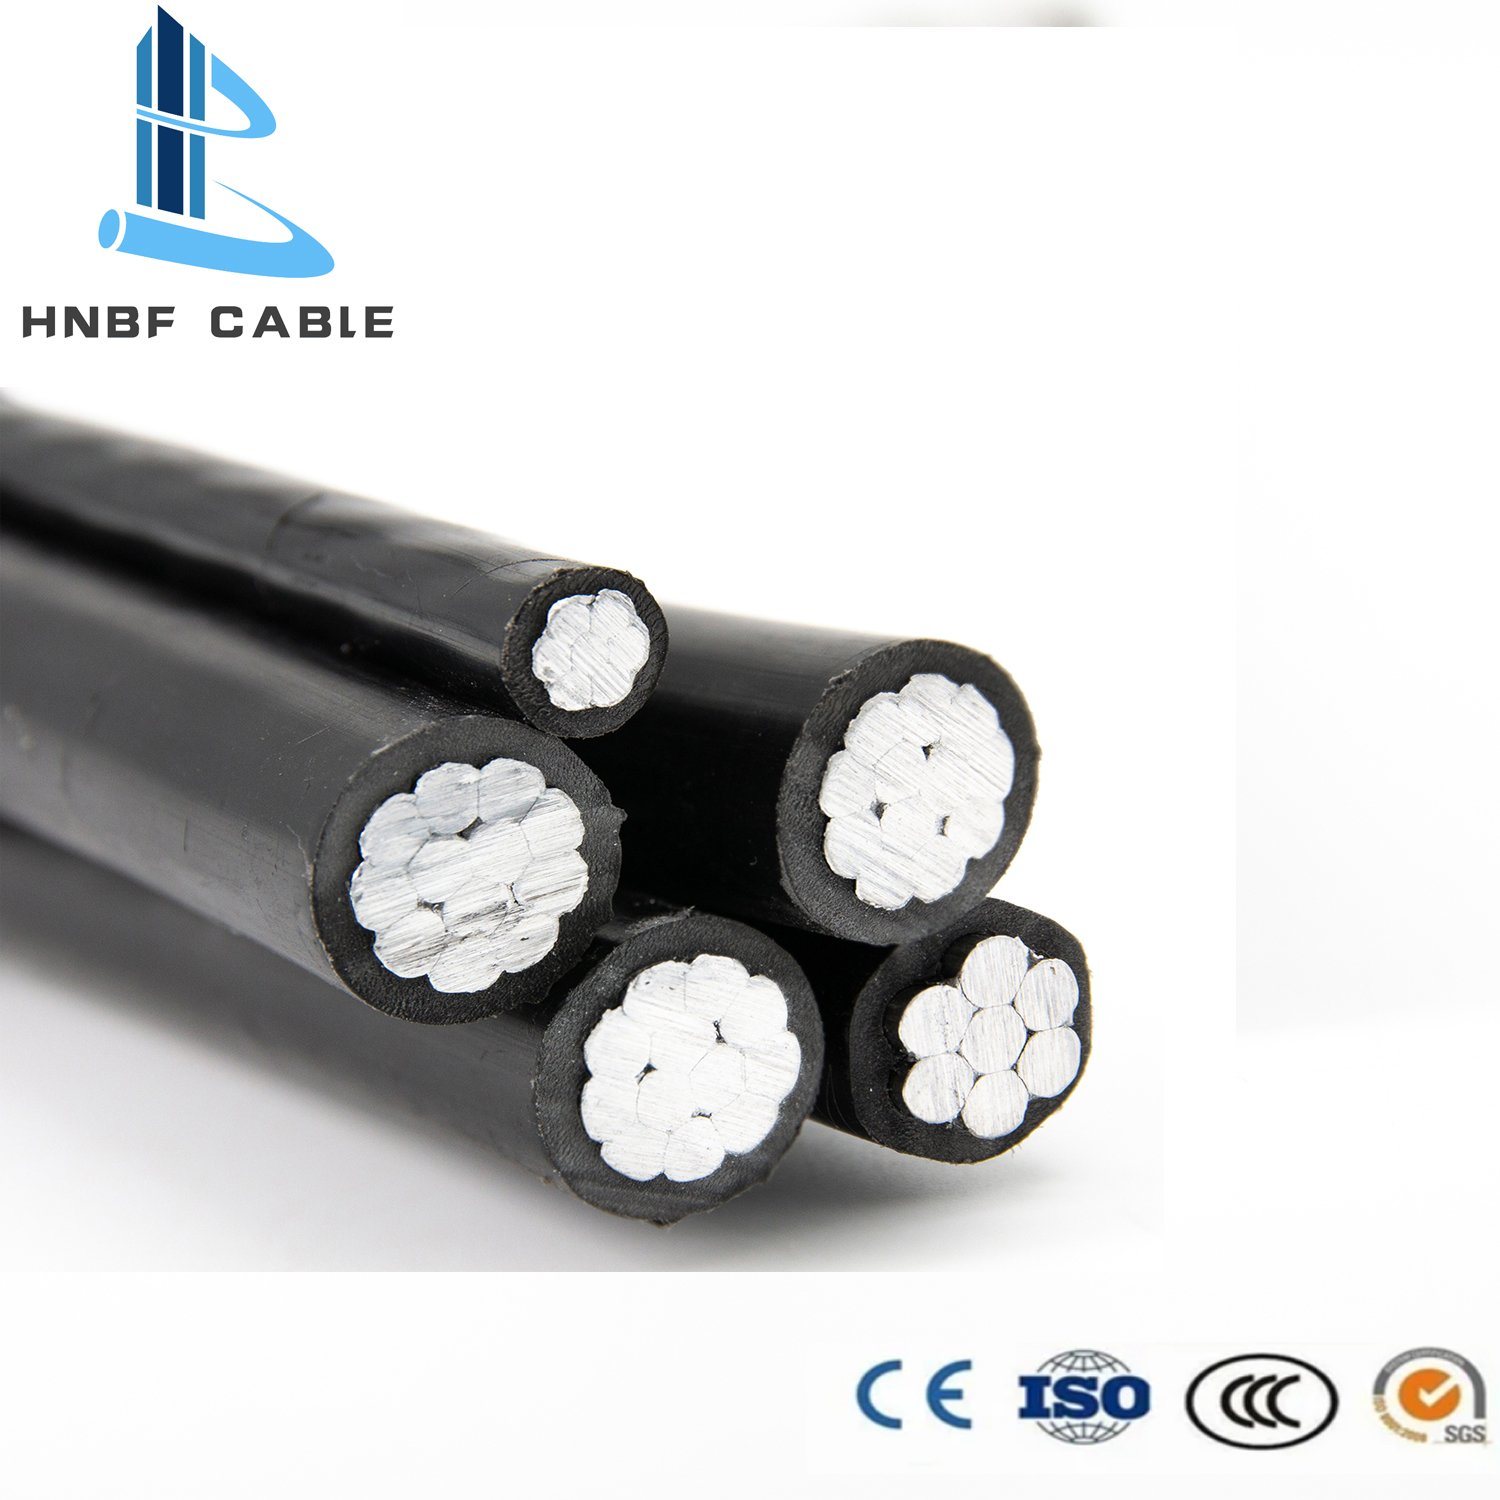 LV ACSR/AAAC Conductor XLPE Covered Aerial Bundled ABC Cable 450kcmil for Overhead Transmission Line